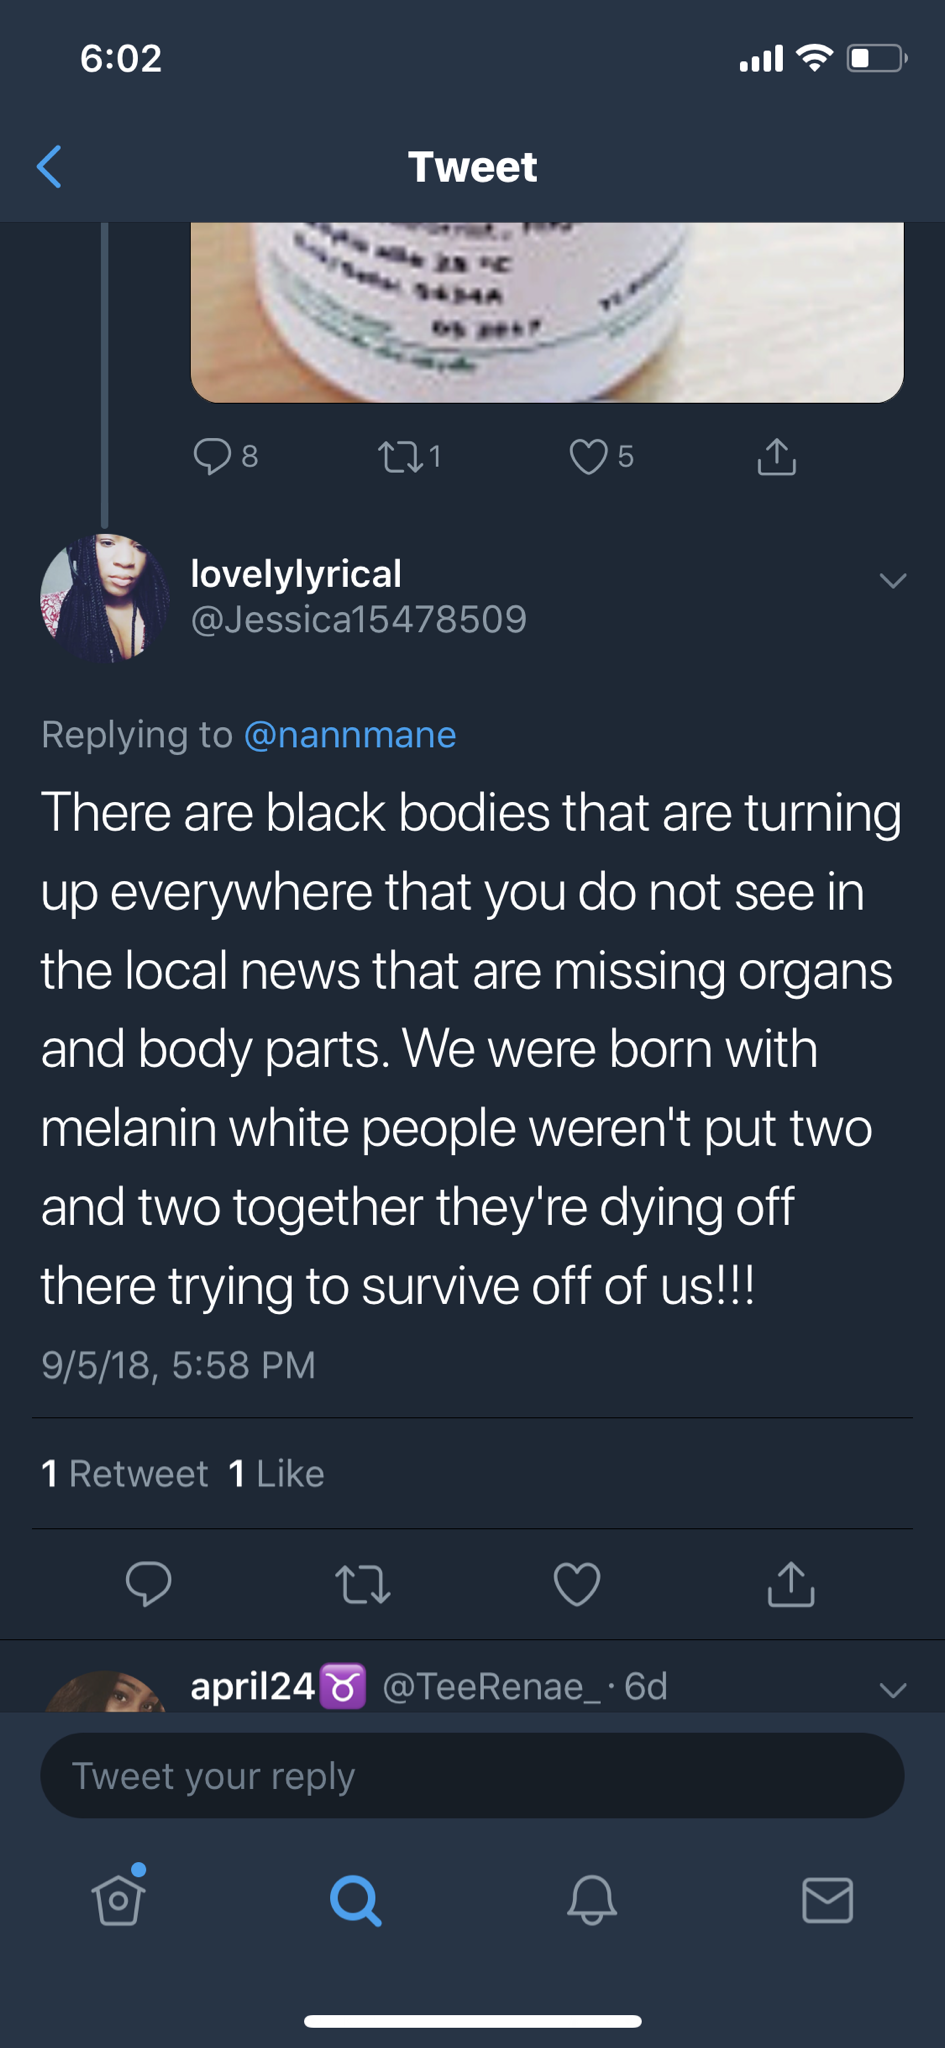 tweet - screenshot - ul Tweet lovelylyrical Jessica15478509 Grannmane There are black bodies that are turning up everywhere that you do not see in the local news that are missing organs and body parts. We were born with melanin white people weren't put tw